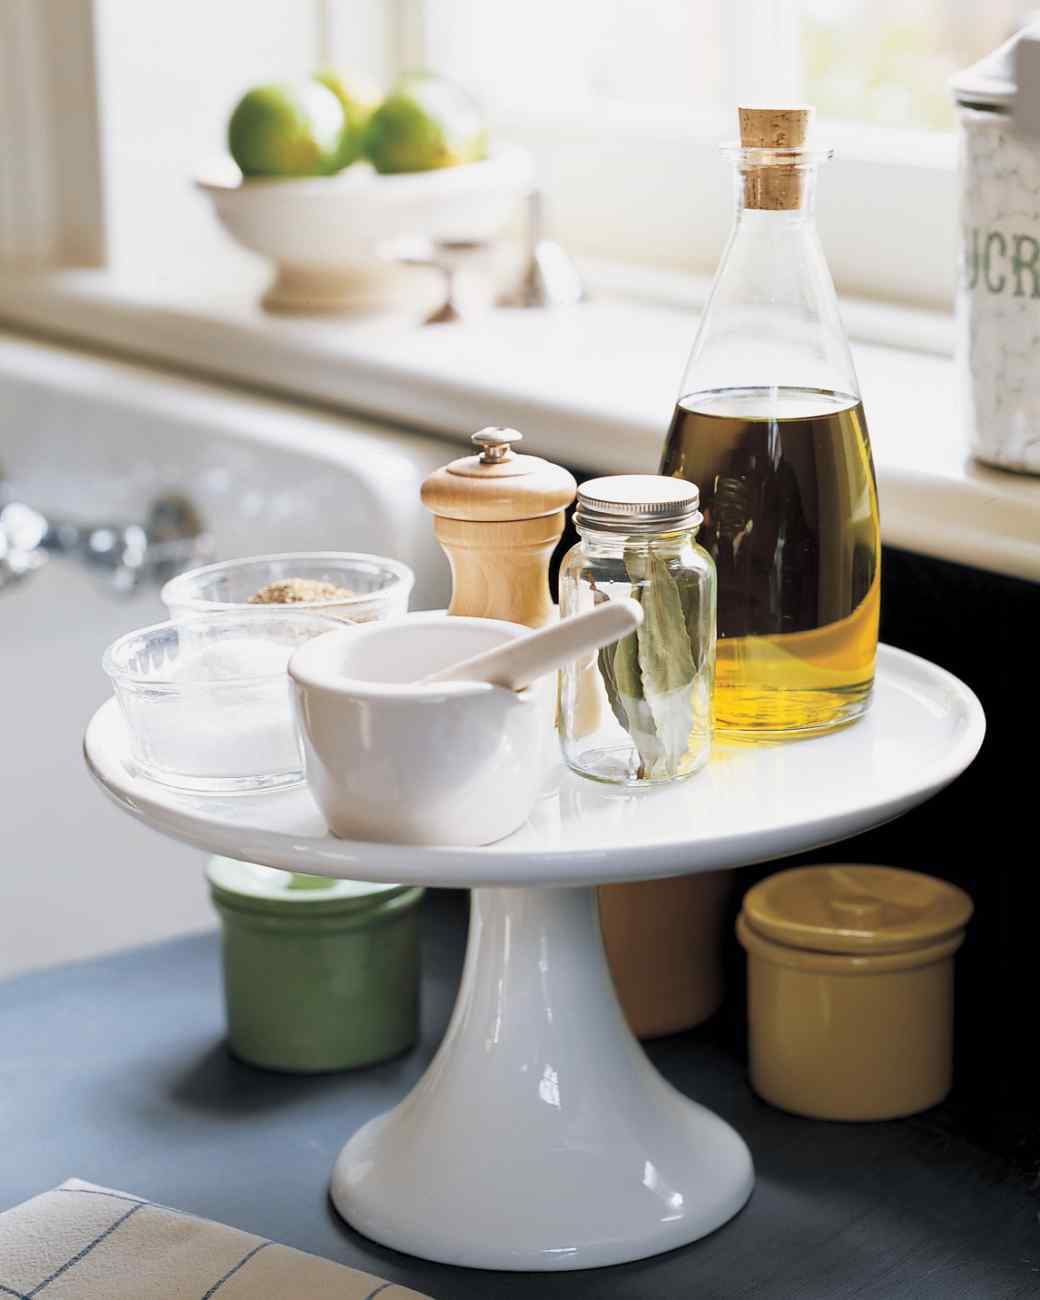 Clear up the clutter and make the most of your countertops by using a cake stand